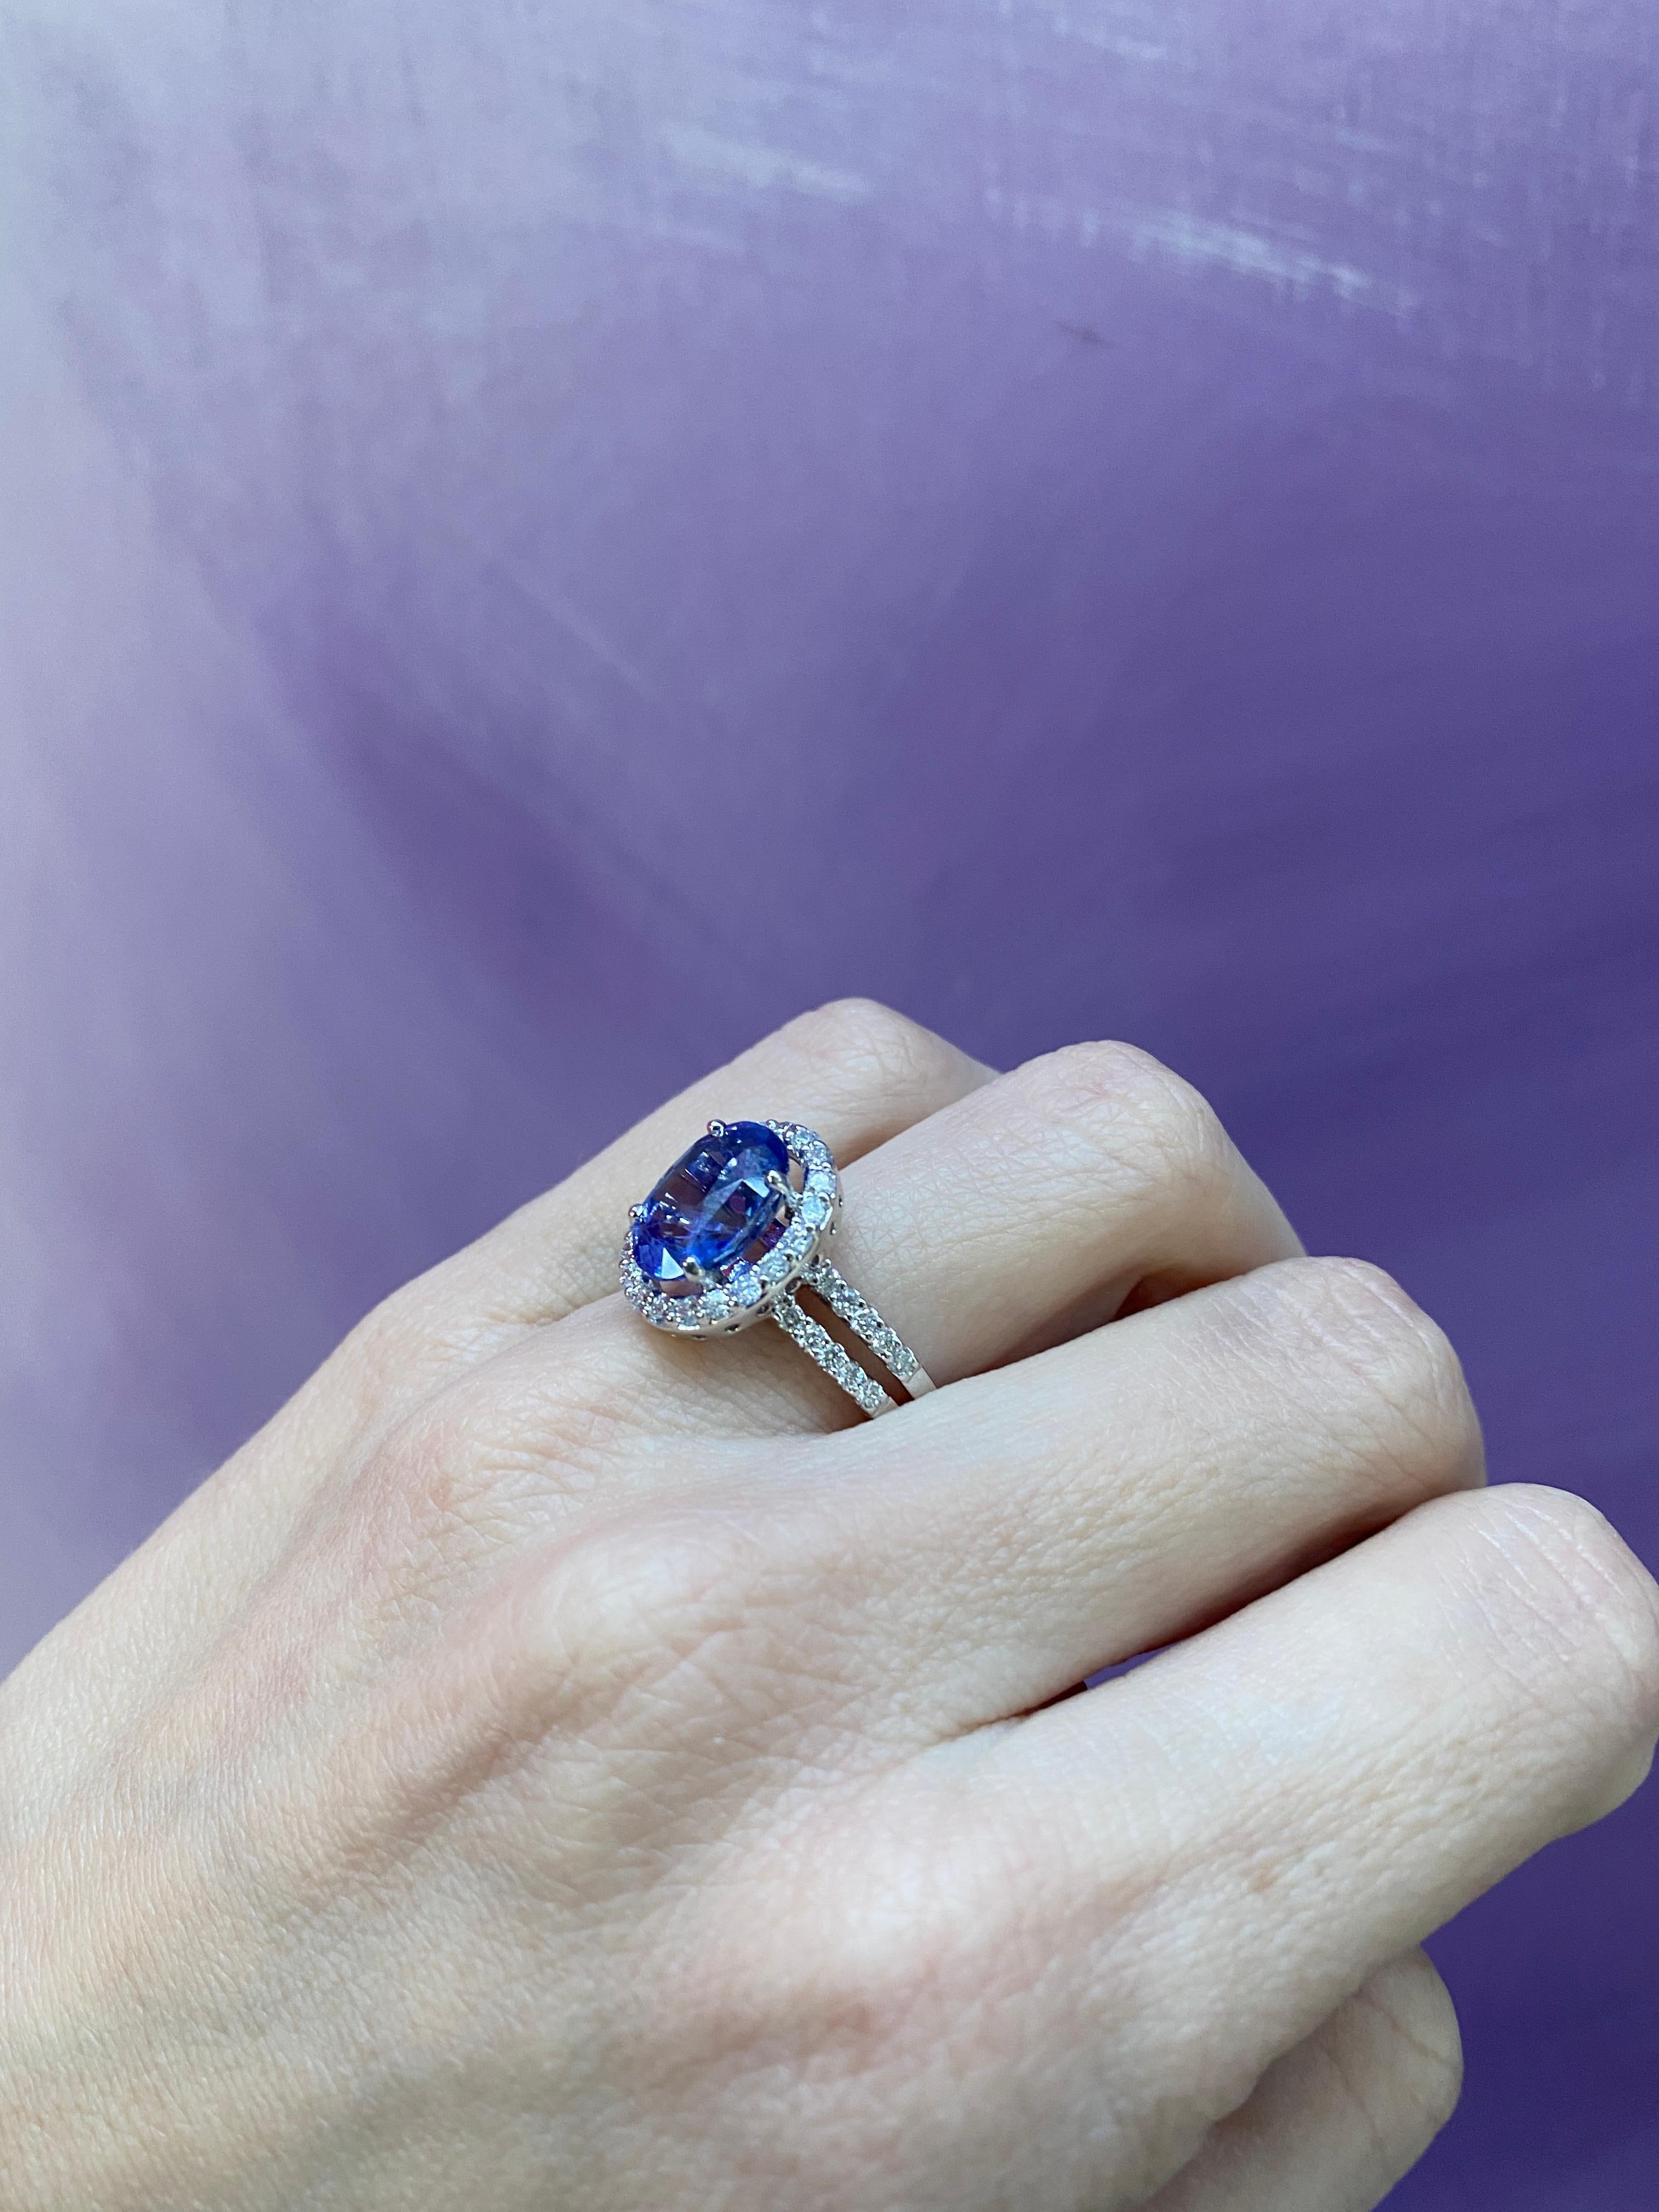 GIA 4.61 Carat Oval Burma Sapphire Ring with 0.73ctw Diamond Halo Cocktail Ring For Sale 8